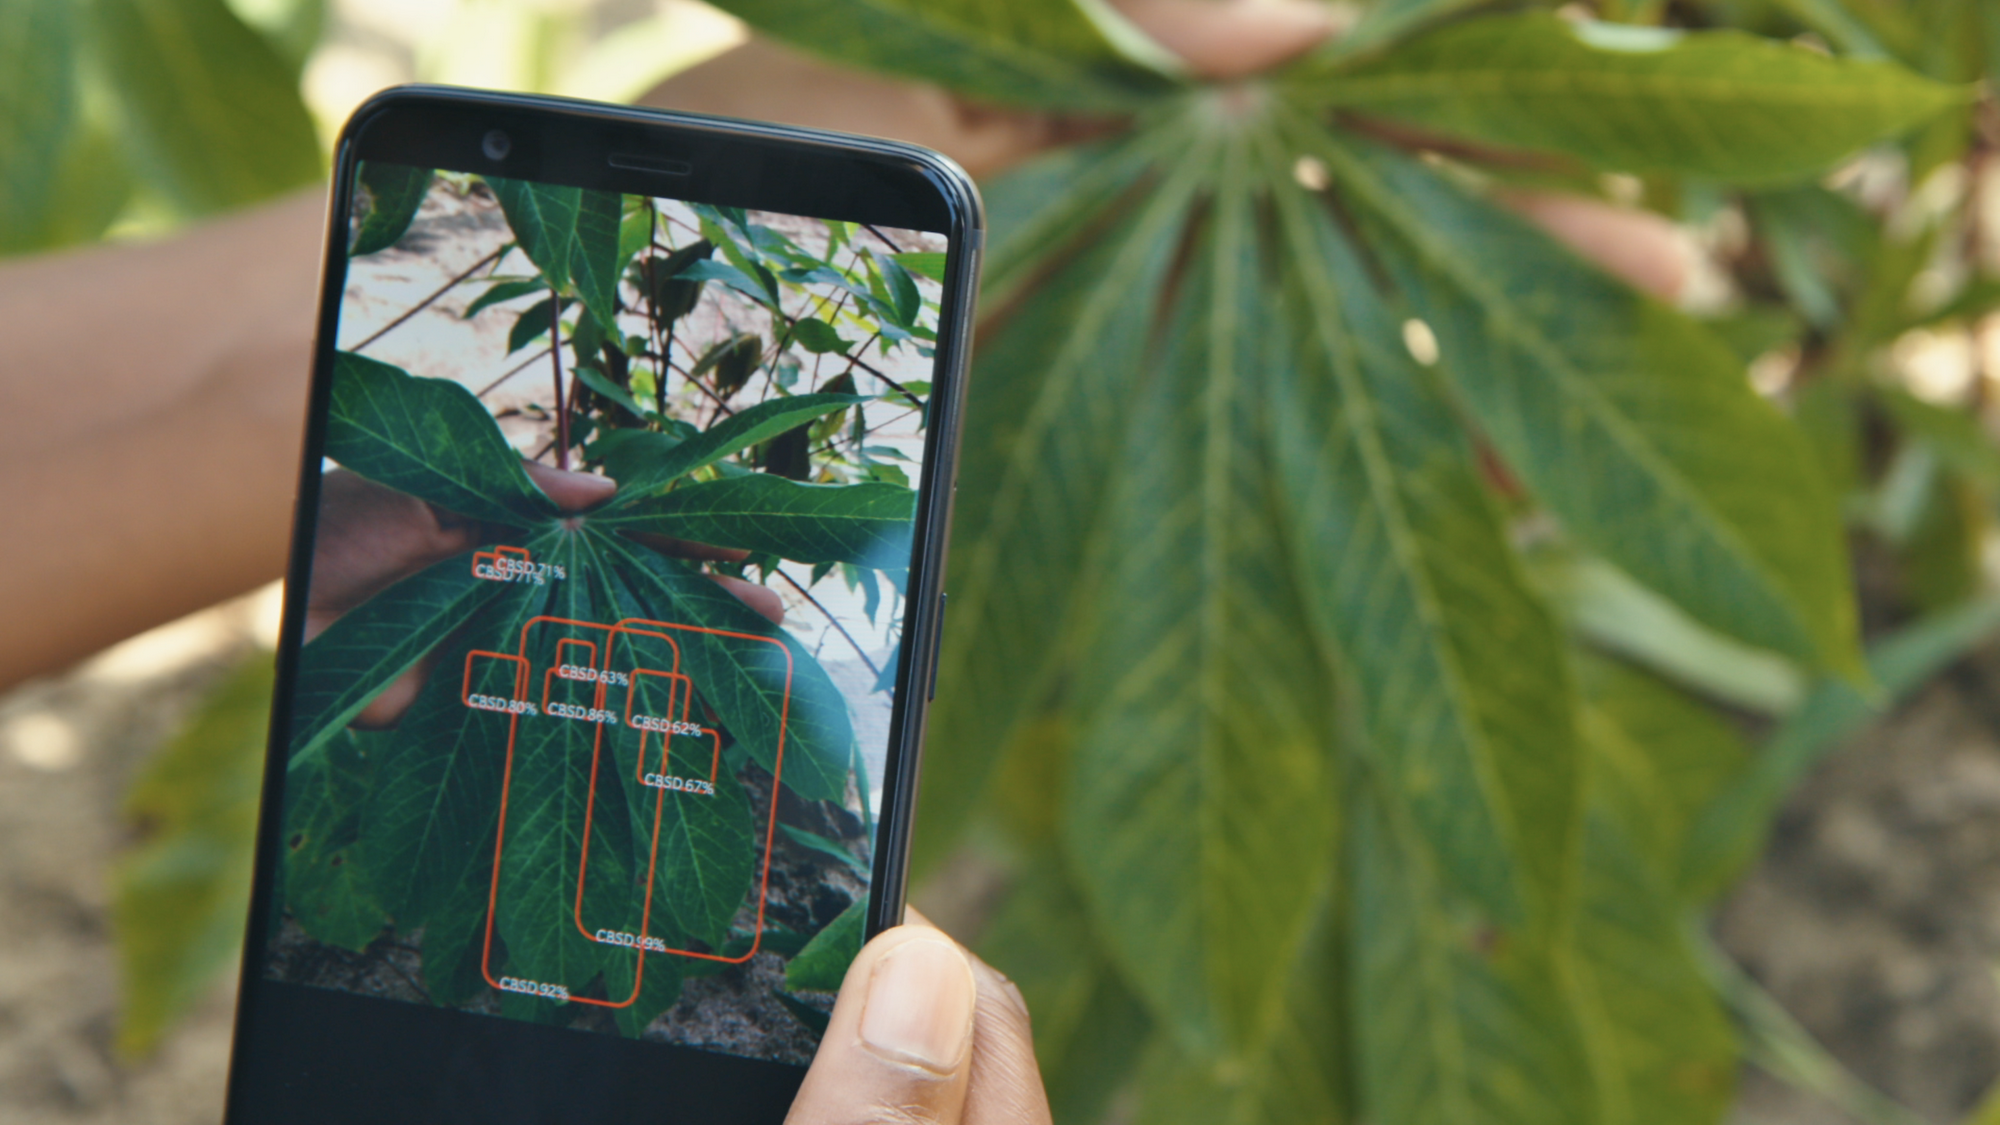 An image of an app that detects disease in cassava plants.